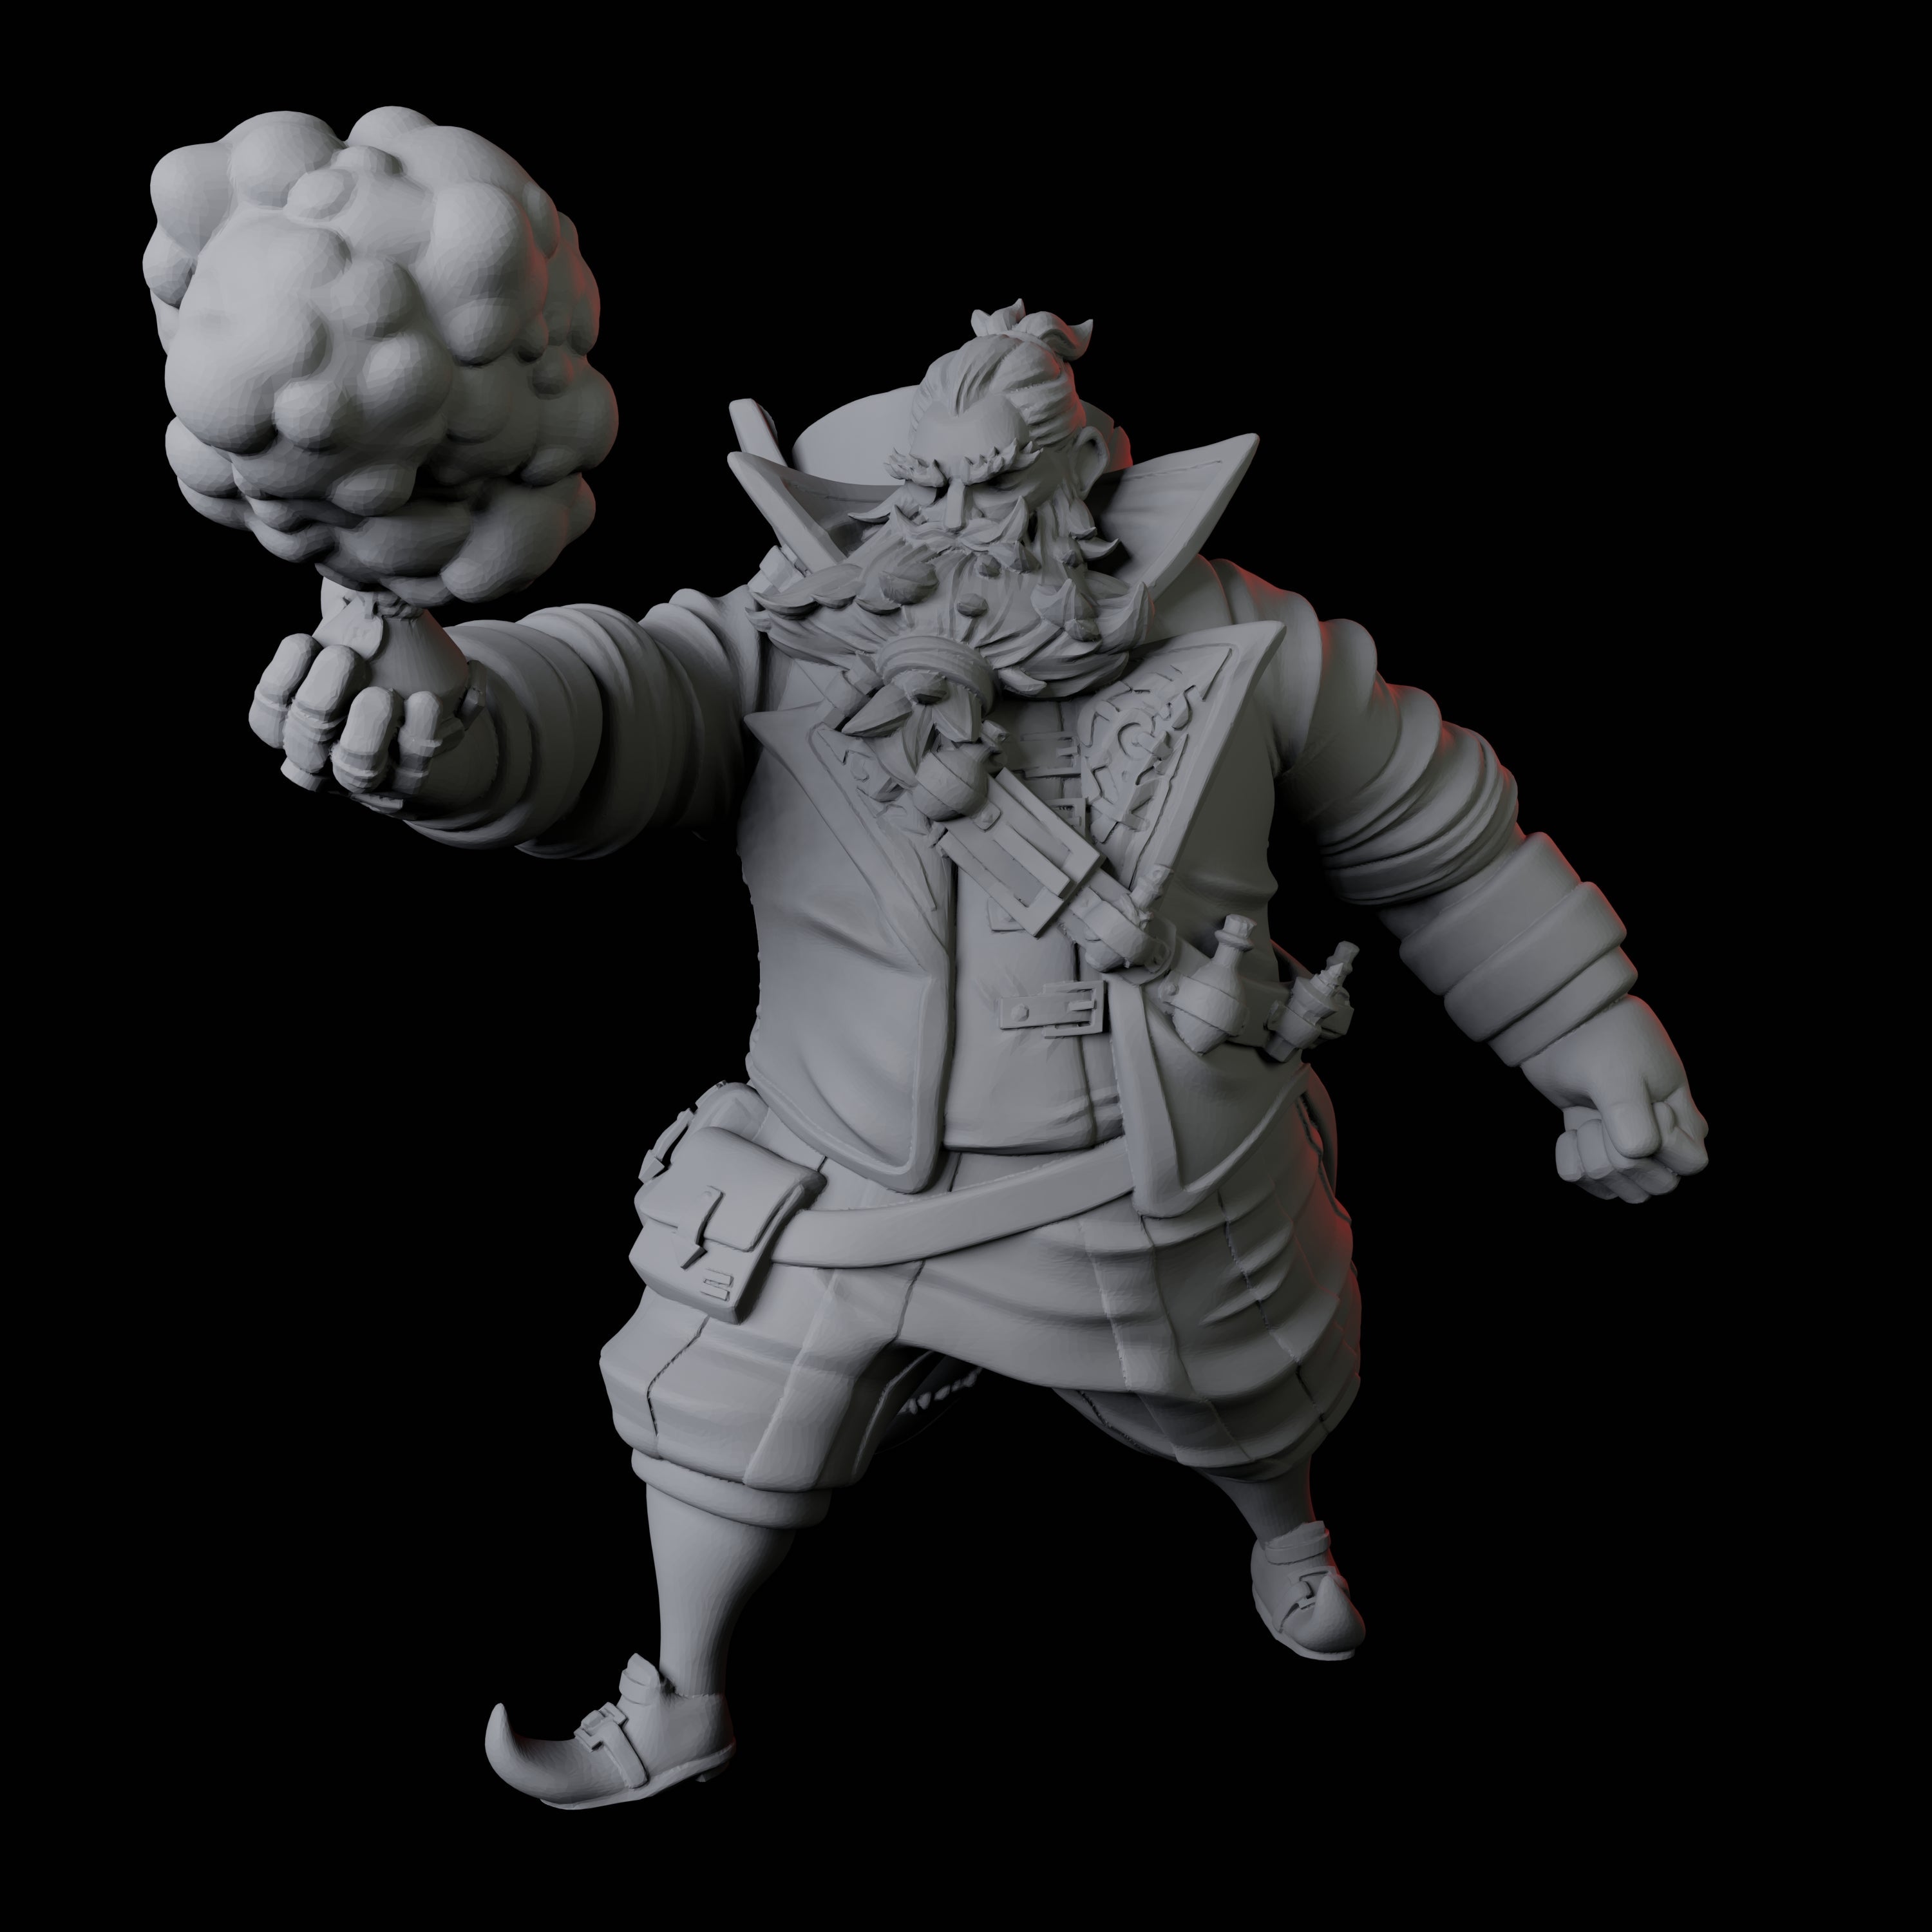 Portly Alchemist B Miniature for Dungeons and Dragons, Pathfinder or other TTRPGs